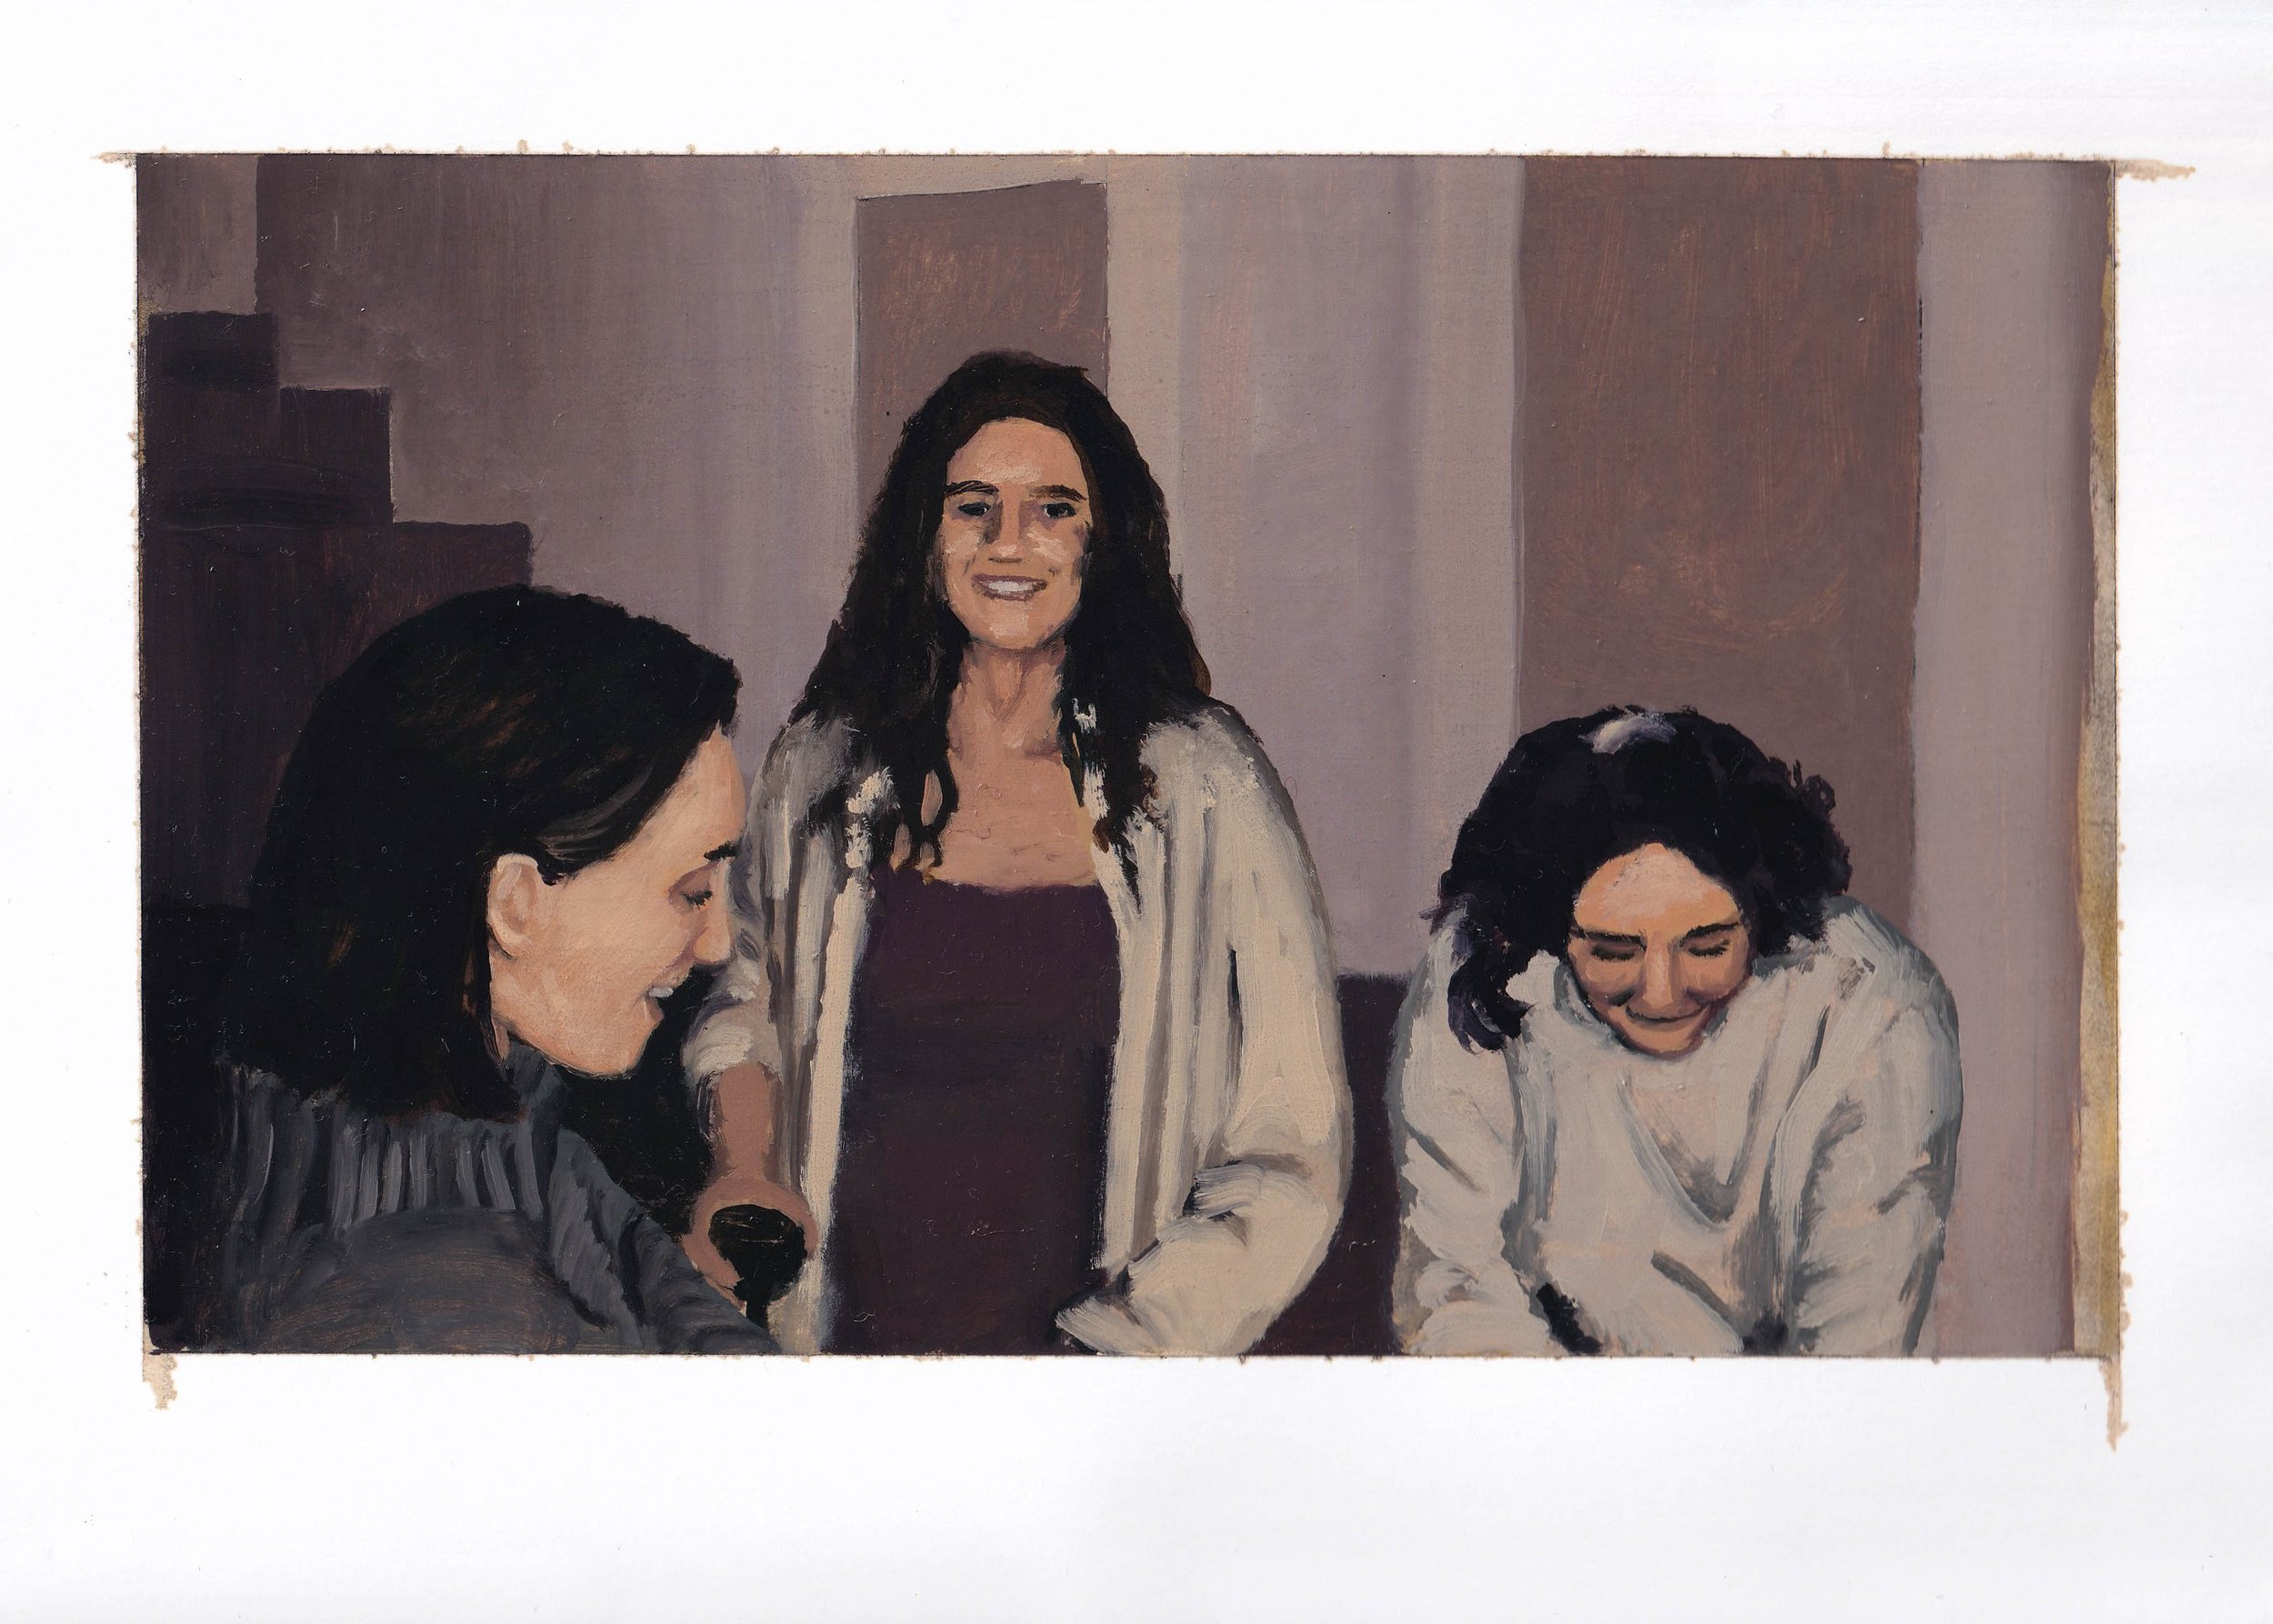  leah, hannah, and emer - 9” x 12” - 2021 - charcoal, amber shellac, and oil paint on paper 